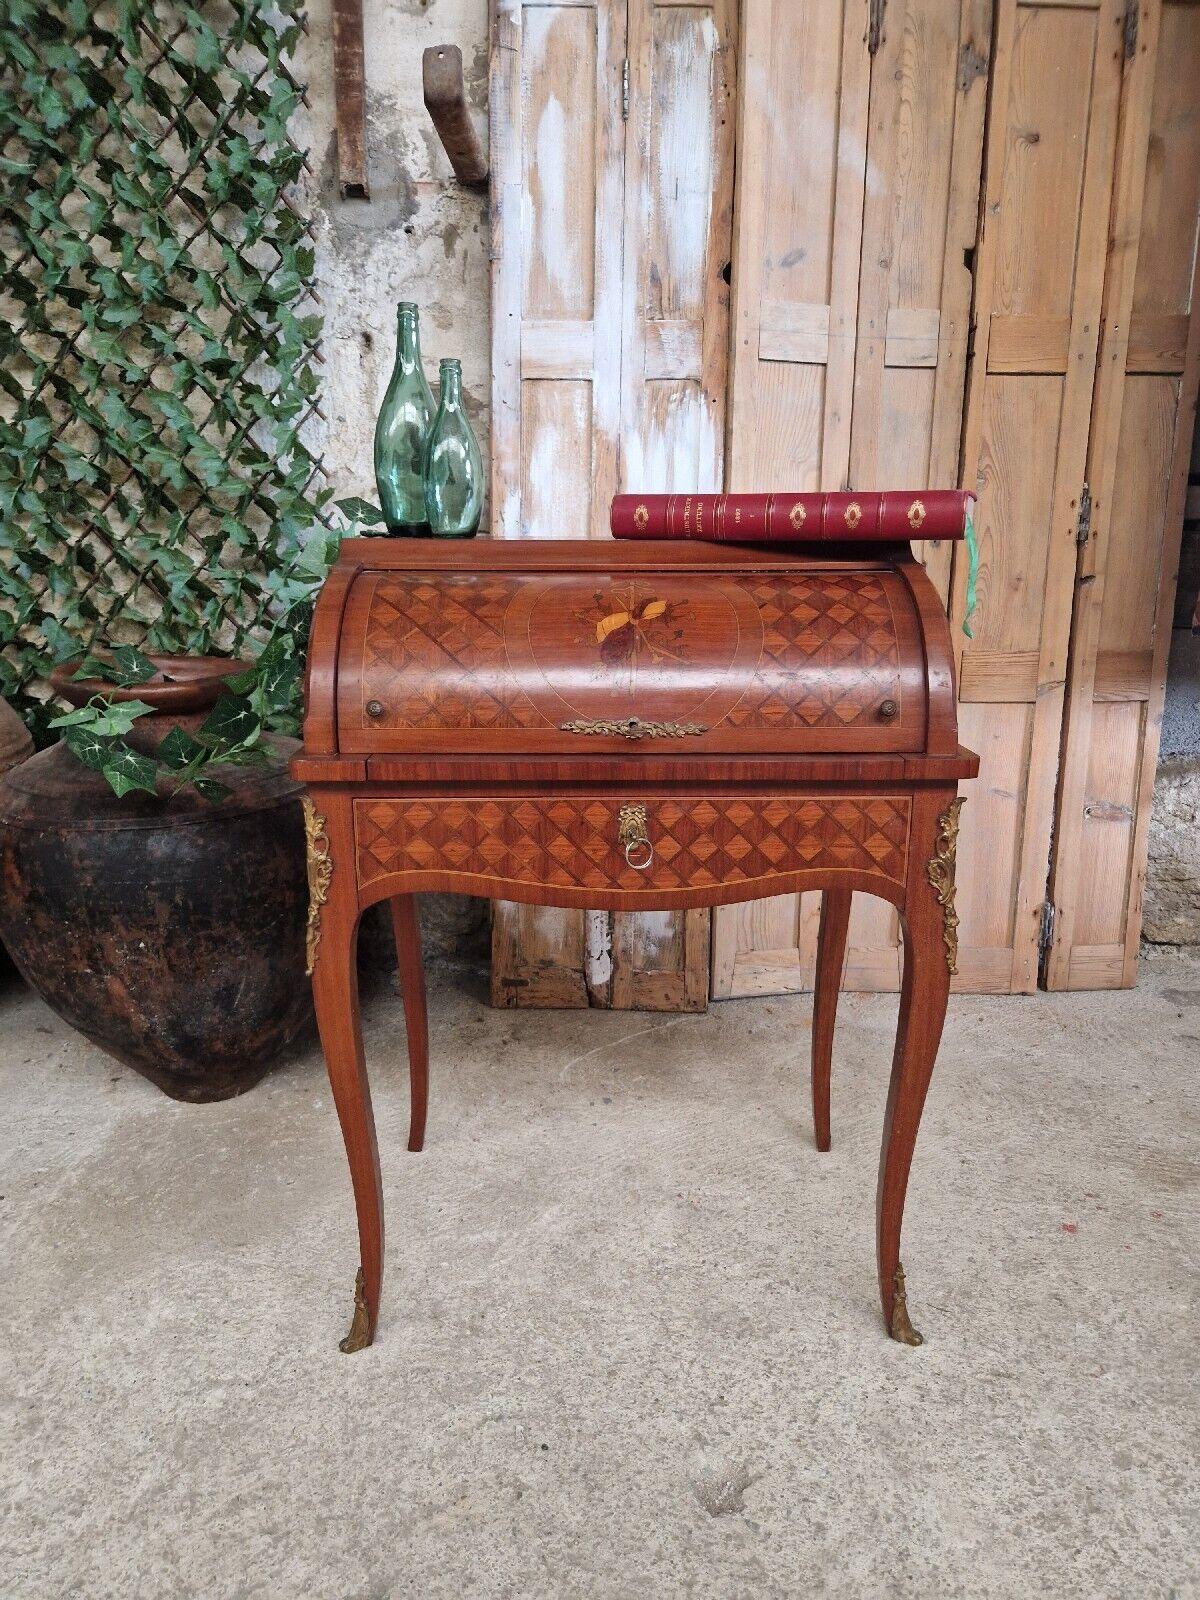 This fabulous Bureau de Dam Writing Desk, has a Cylinder Roll Top and has been designed in Louis XV Style.

The desk is dated late 19th Century and of French origin. The Bureau is Inlaid and veneered in various wood colours and styles, with a